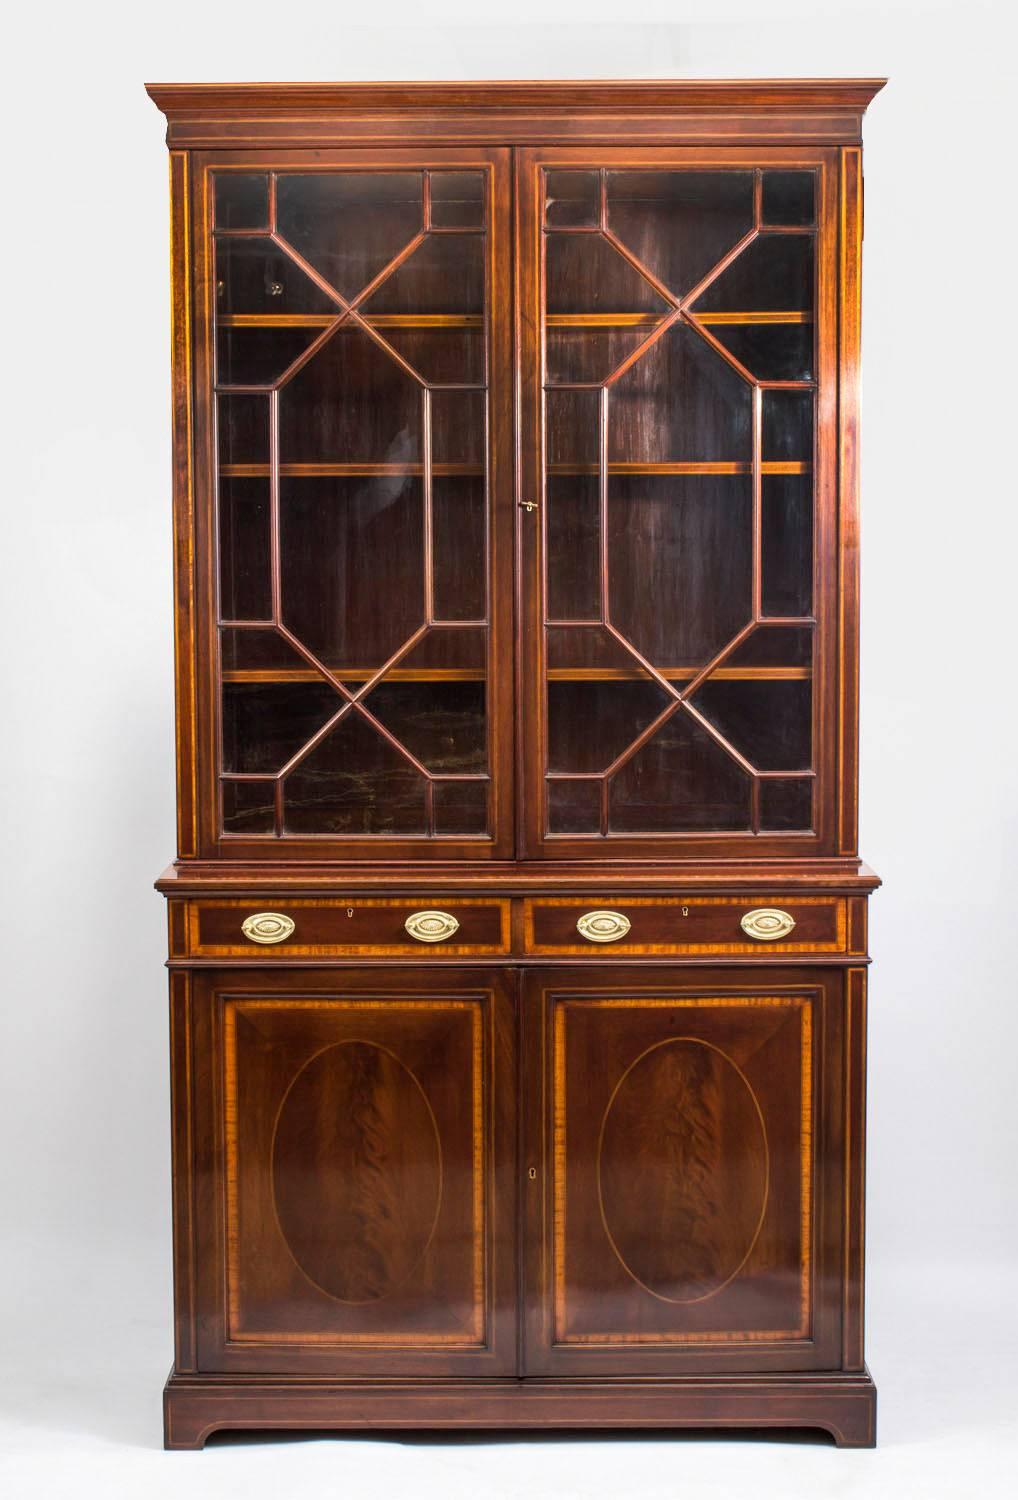 This is an absolutely stunning antique Edwardian flame mahogany and satinwood inlaid bookcase by Maple & Co, circa 1900 in date.

The bookcase bears the ivorine plaque of the renowned maker and retailer Maple & Co.

This fabulous bookcase features a